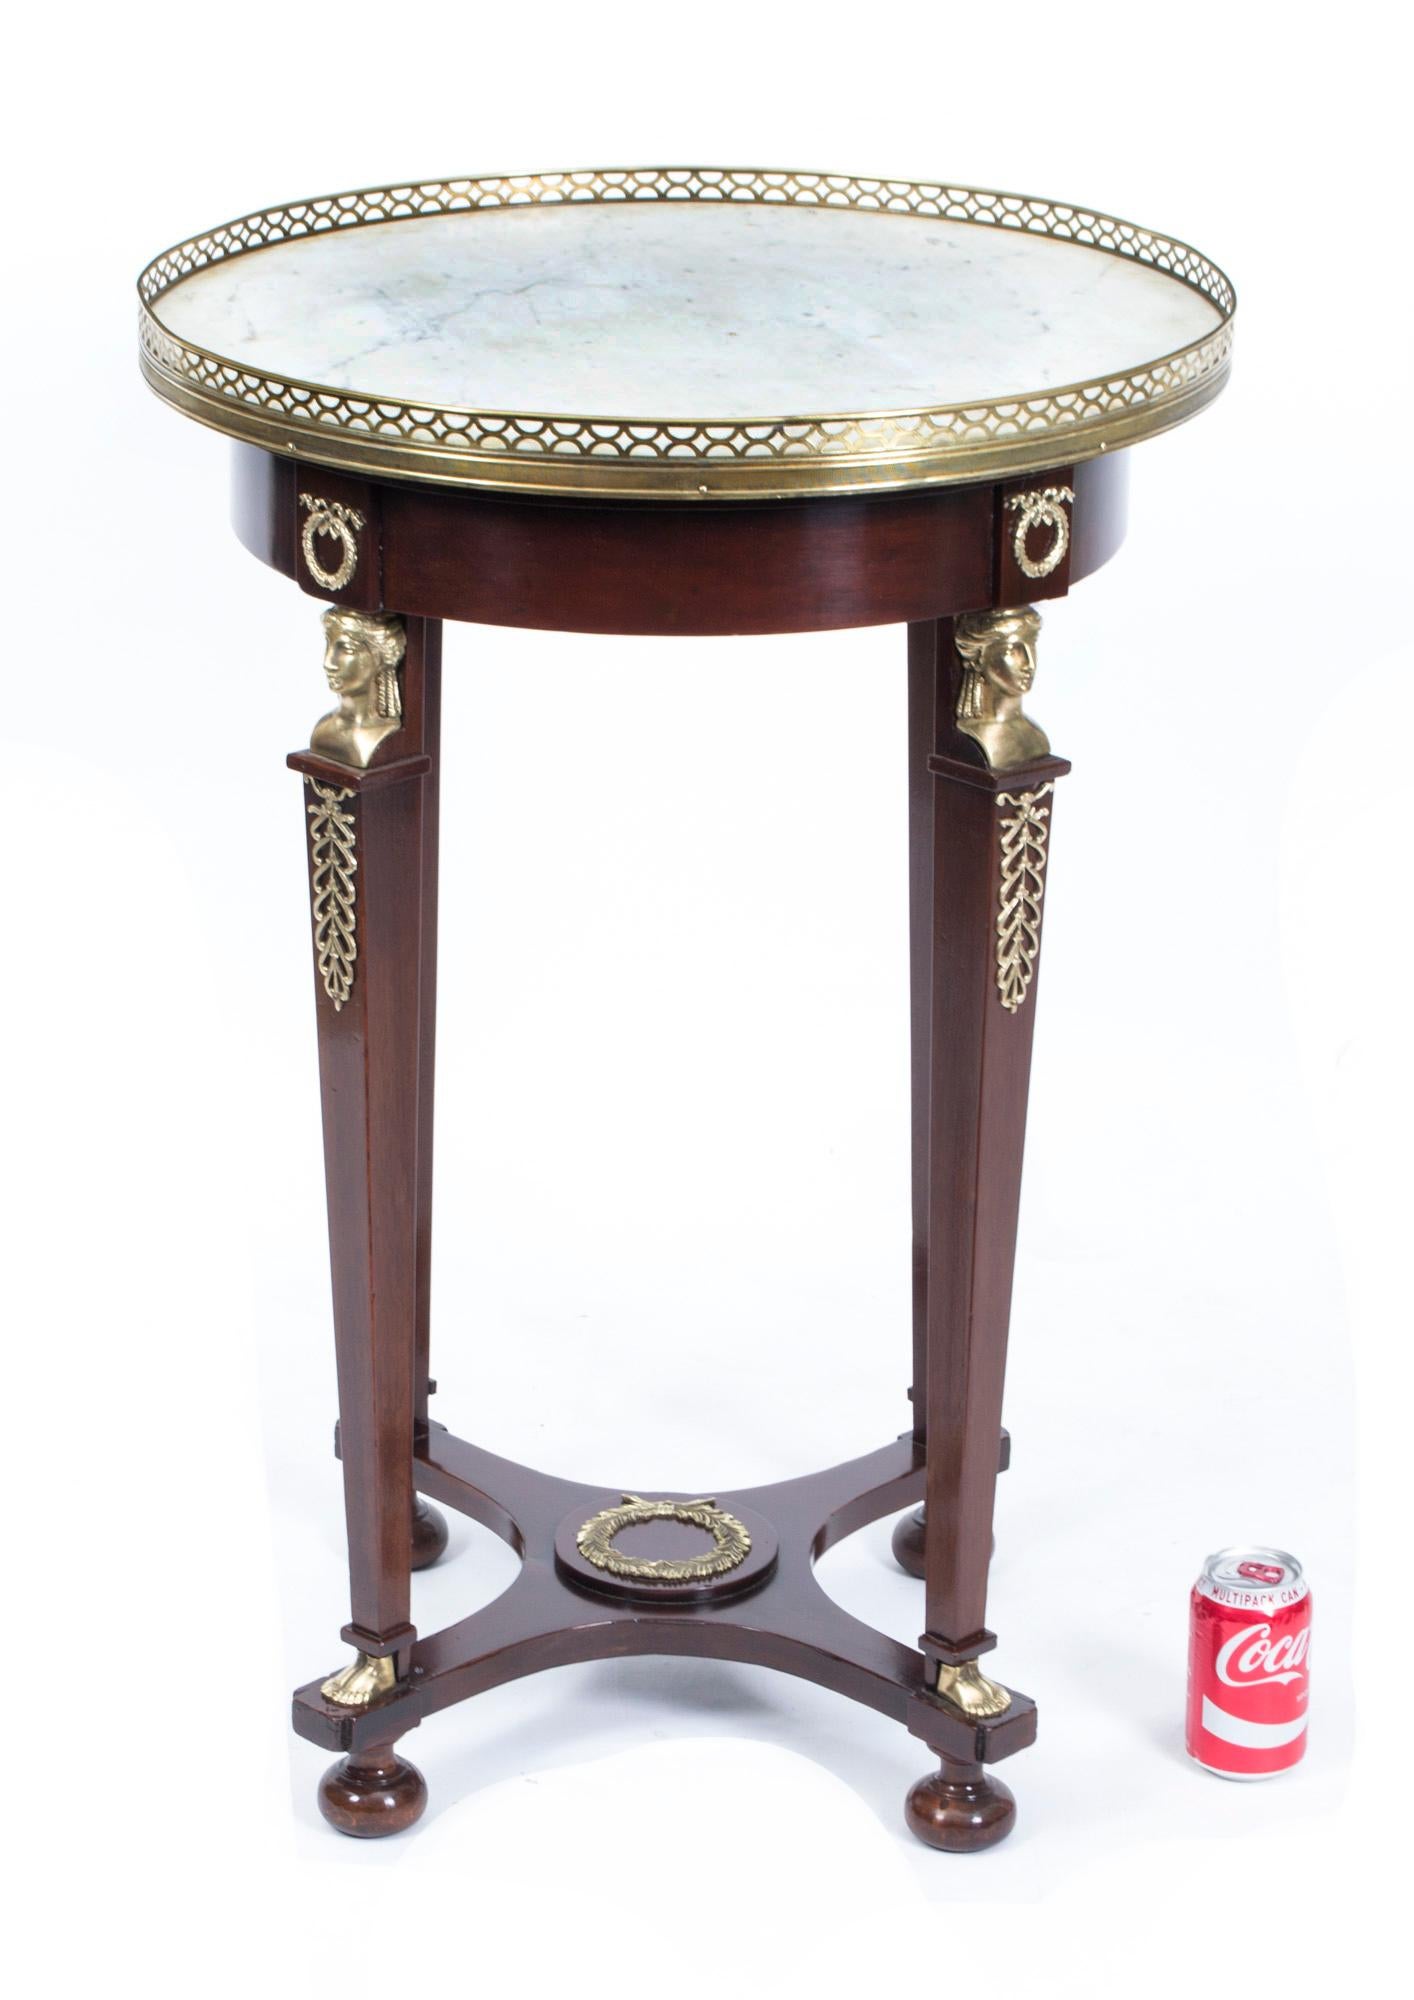 Antique French Empire Marble & Ormolu Occasional Table 19th Century For Sale 5